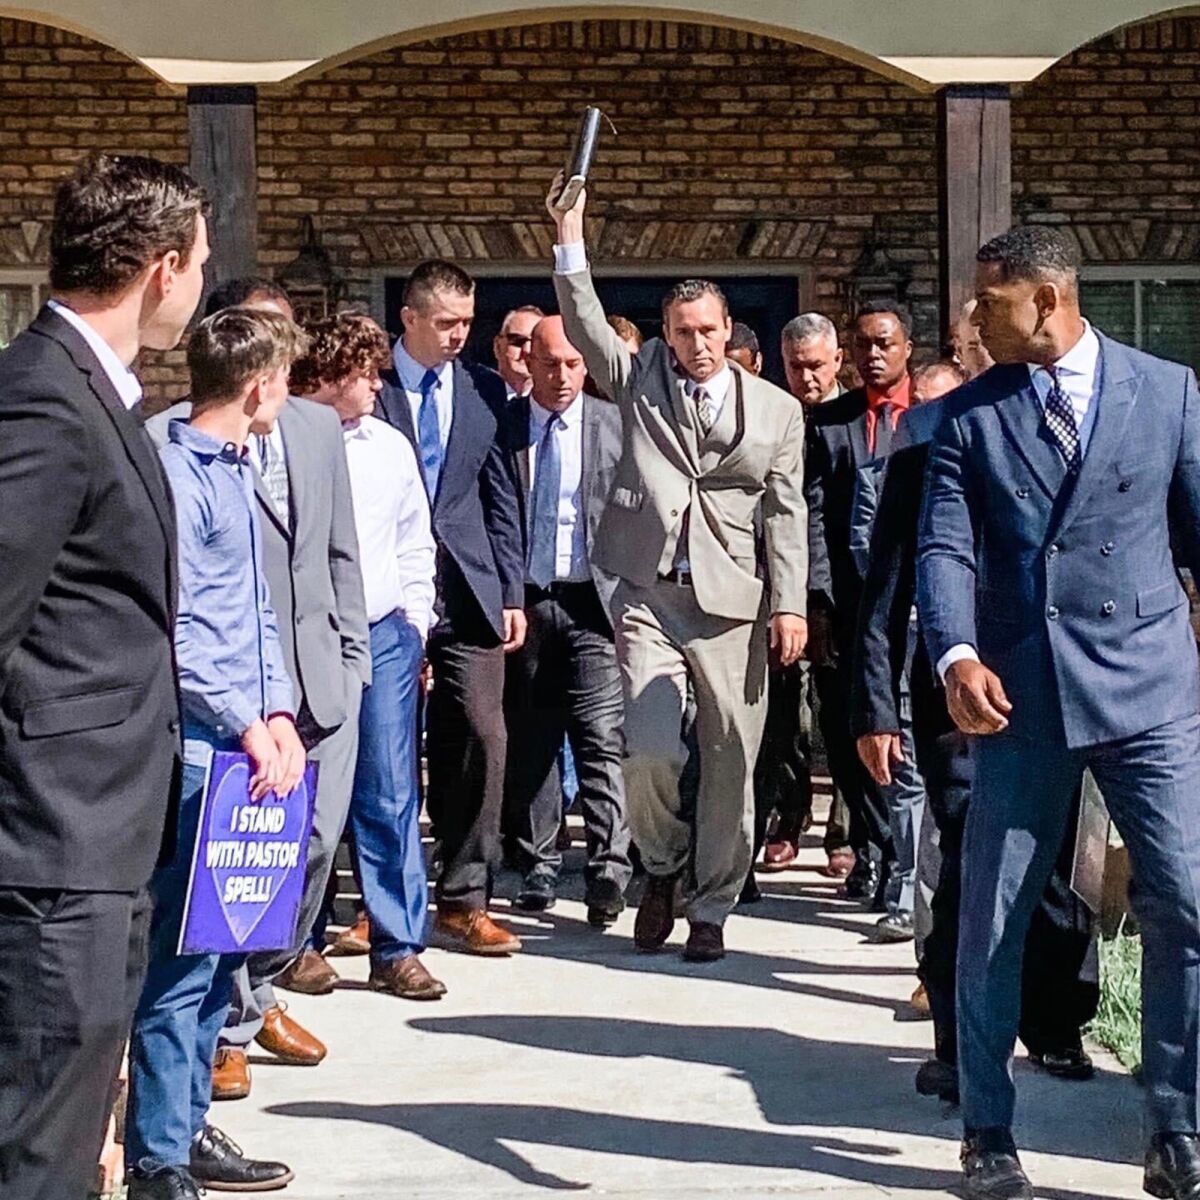 Rev. Tony Spell leaves his home in suburban Baton Rouge, La., where he has been held under house arrest, and walks with members of his congregation to lead Sunday-morning service at Life Tabernacle Church next door.